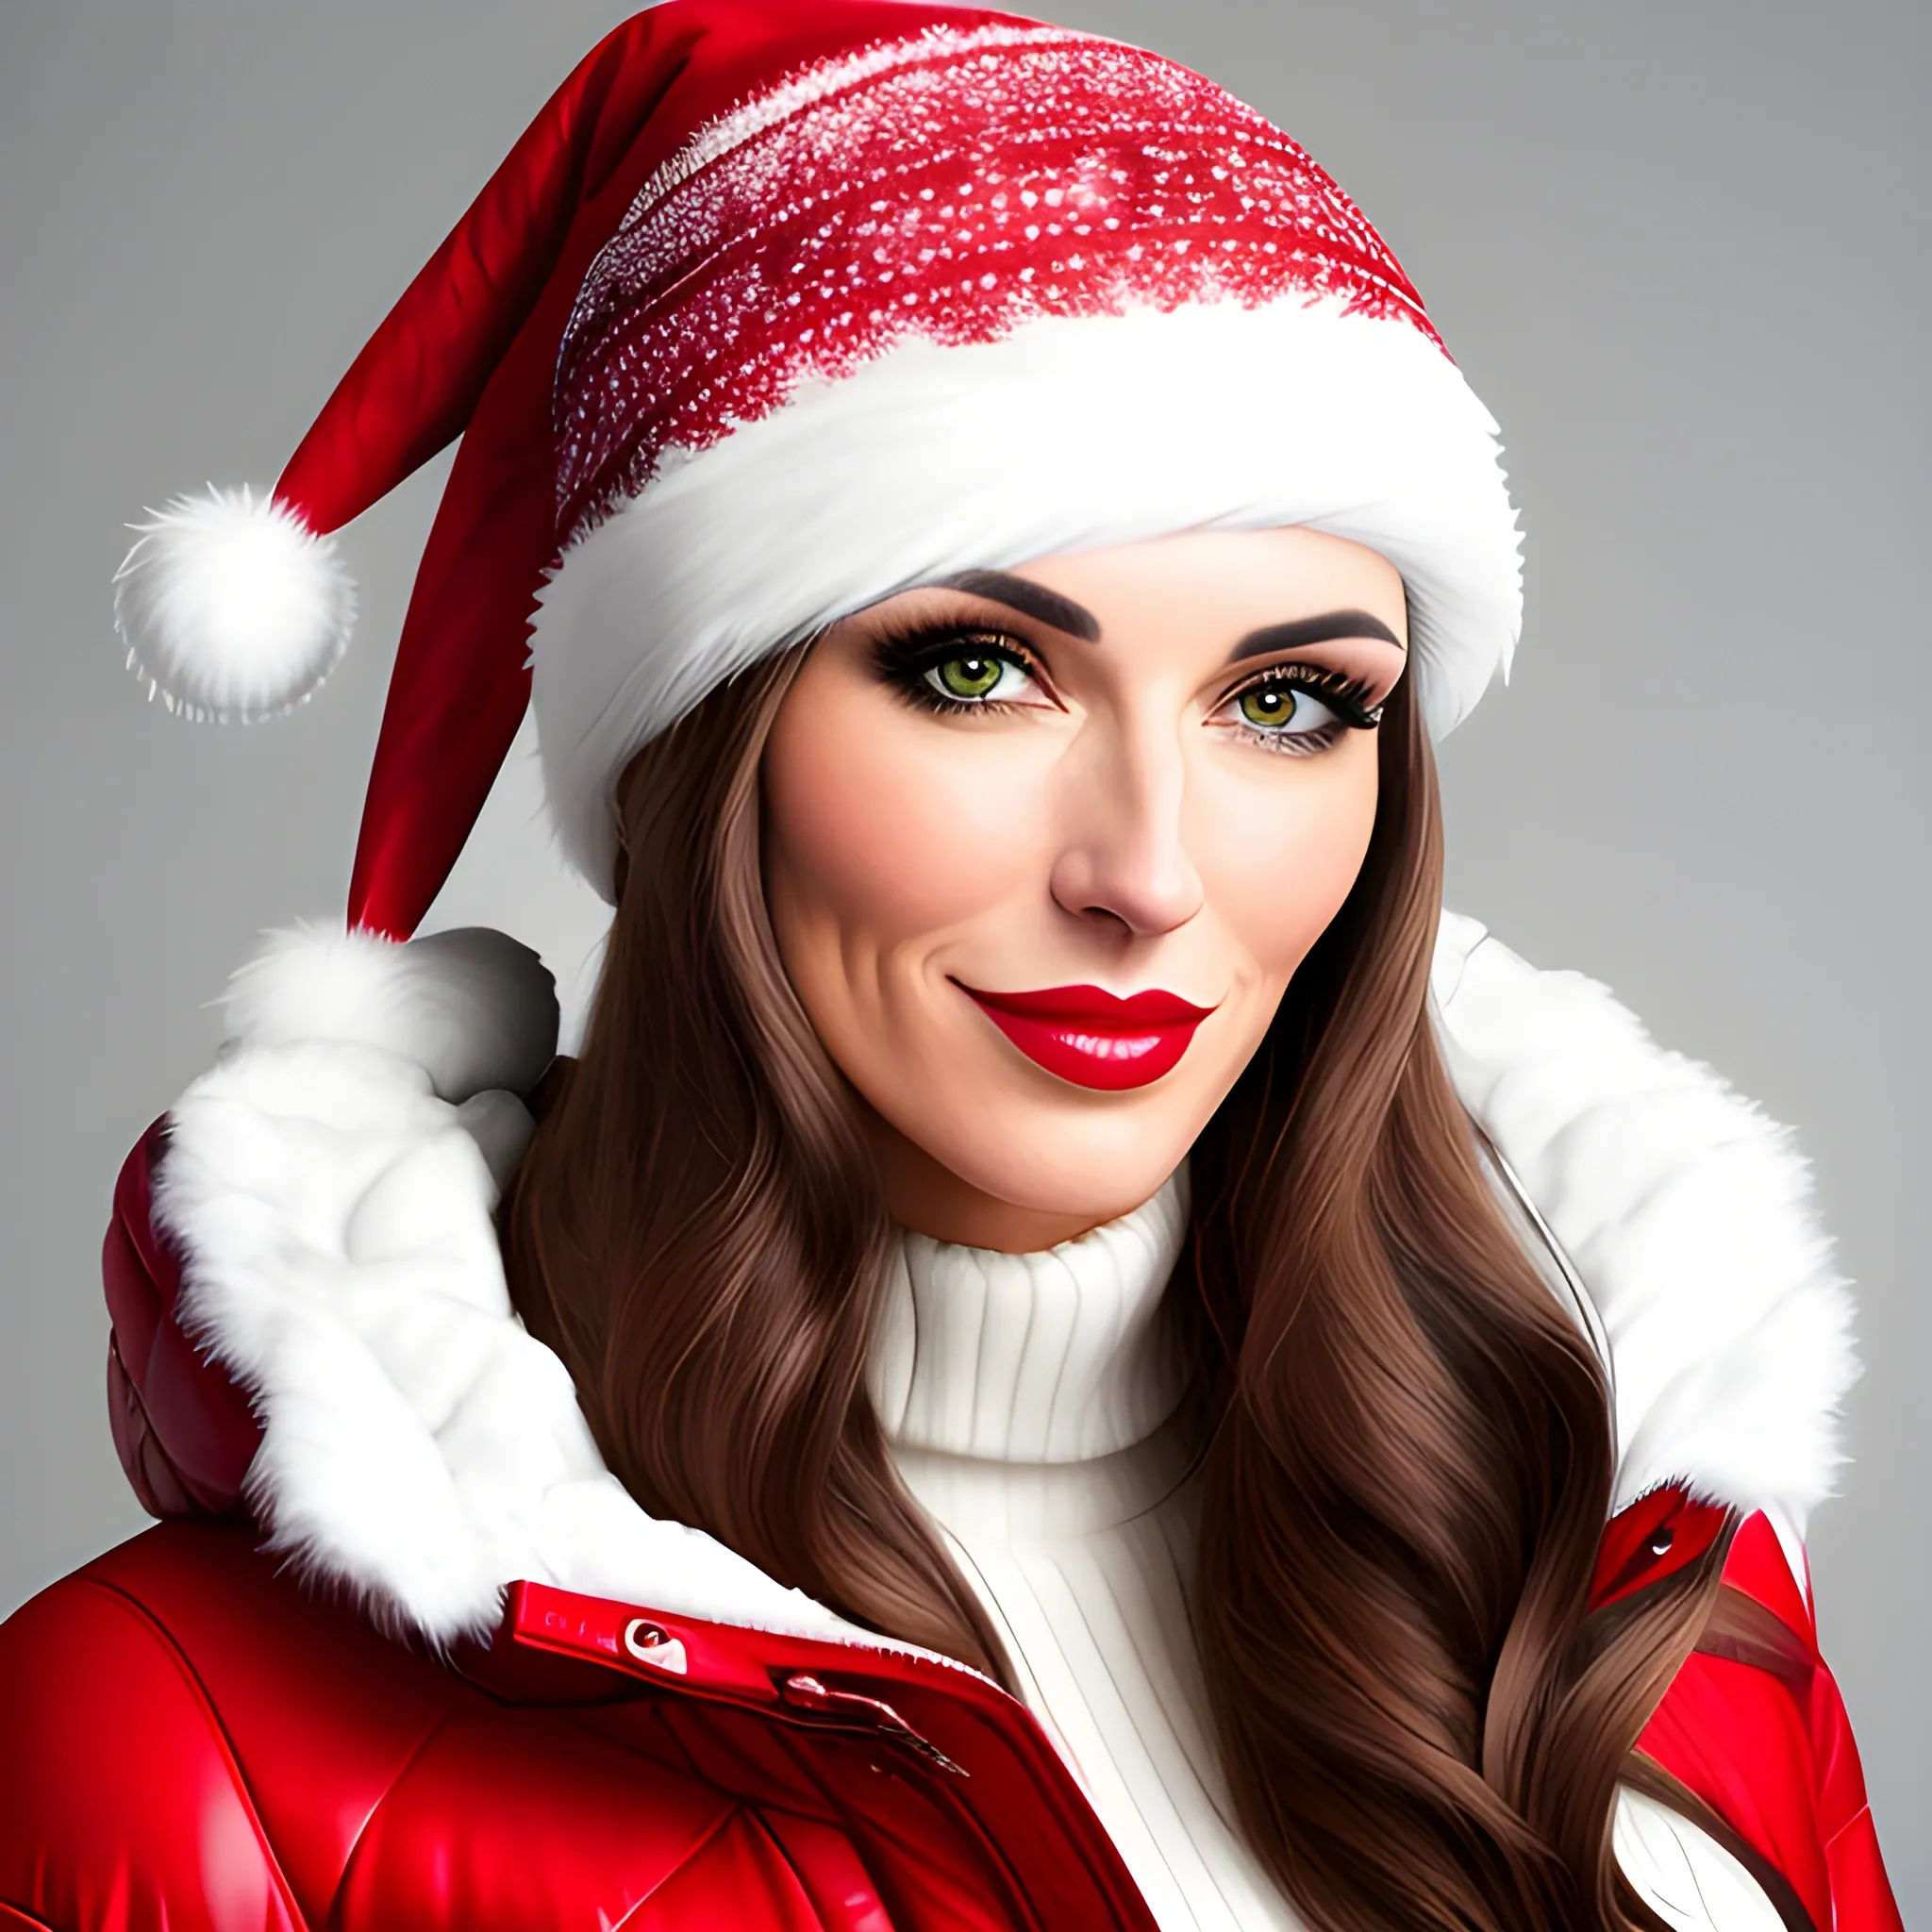 Portrait of a beautiful girl wearing a knee-high white down jacket woven with abstract patterns and a Christmas hat on her head, photographic style